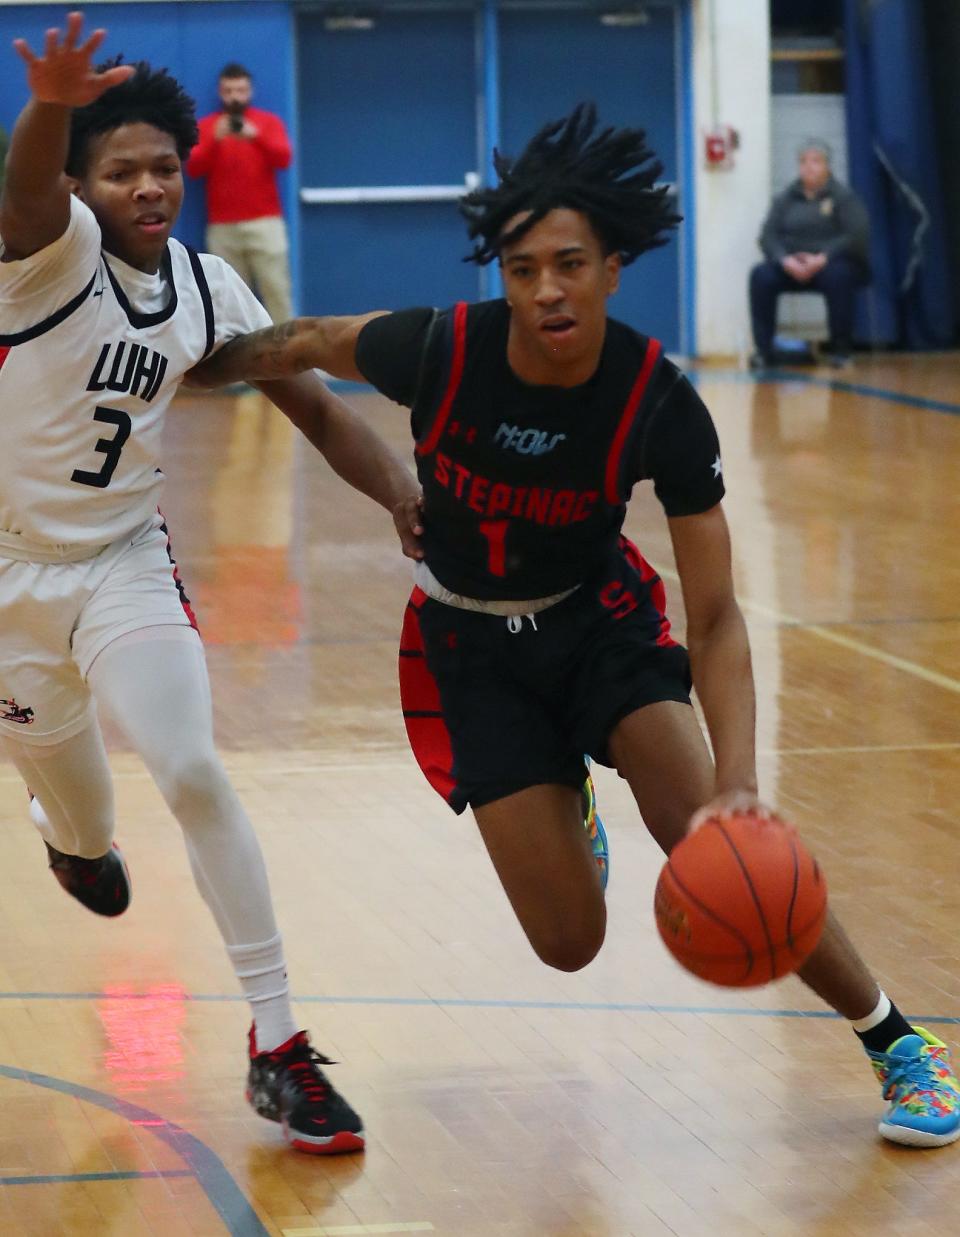 Stepinac's Boogie Fland (1) during game against Long Island Lutheran in the New York State Federation Tournament championship at Shaker High School in Latham March 26, 2023.
(Credit: Frank Becerra Jr./The Journal News)